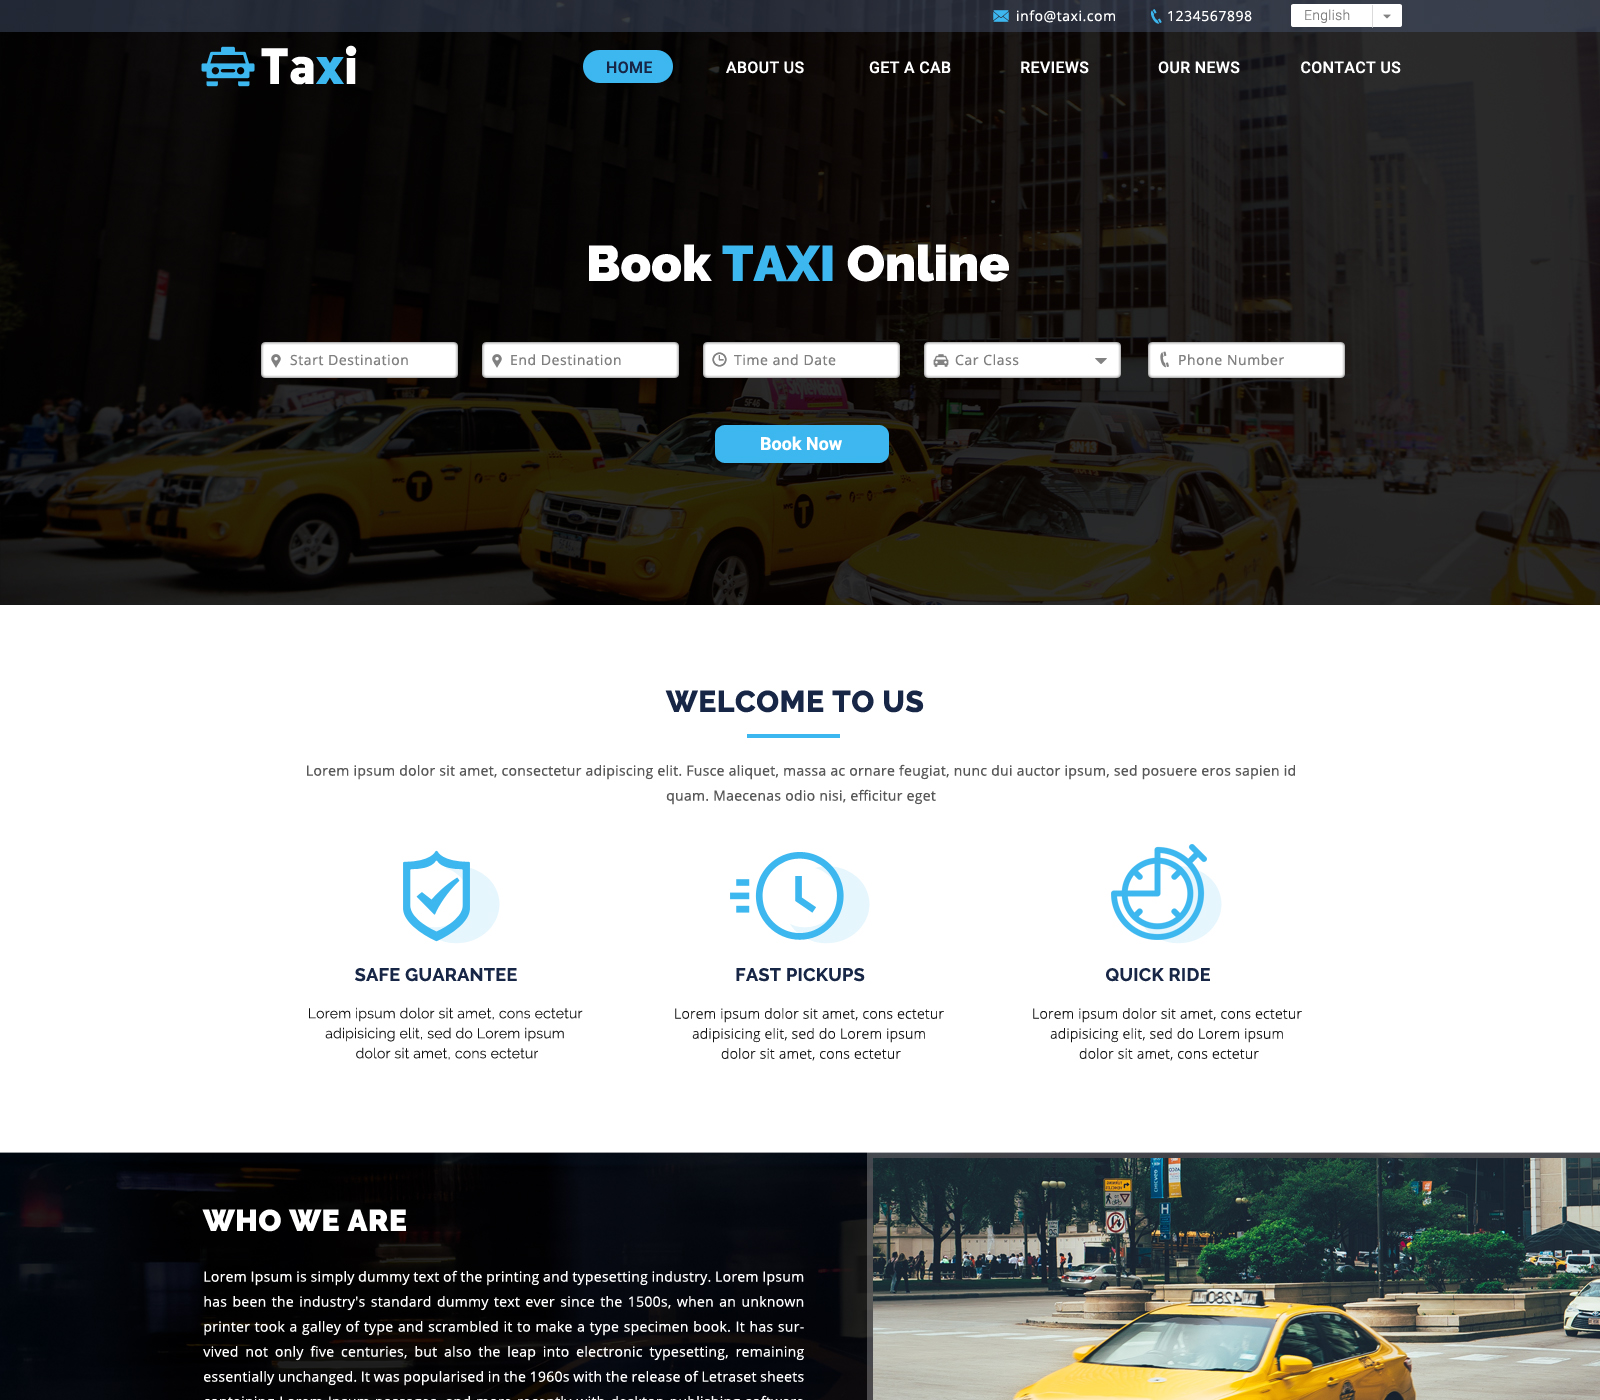 Taxi Booking Website